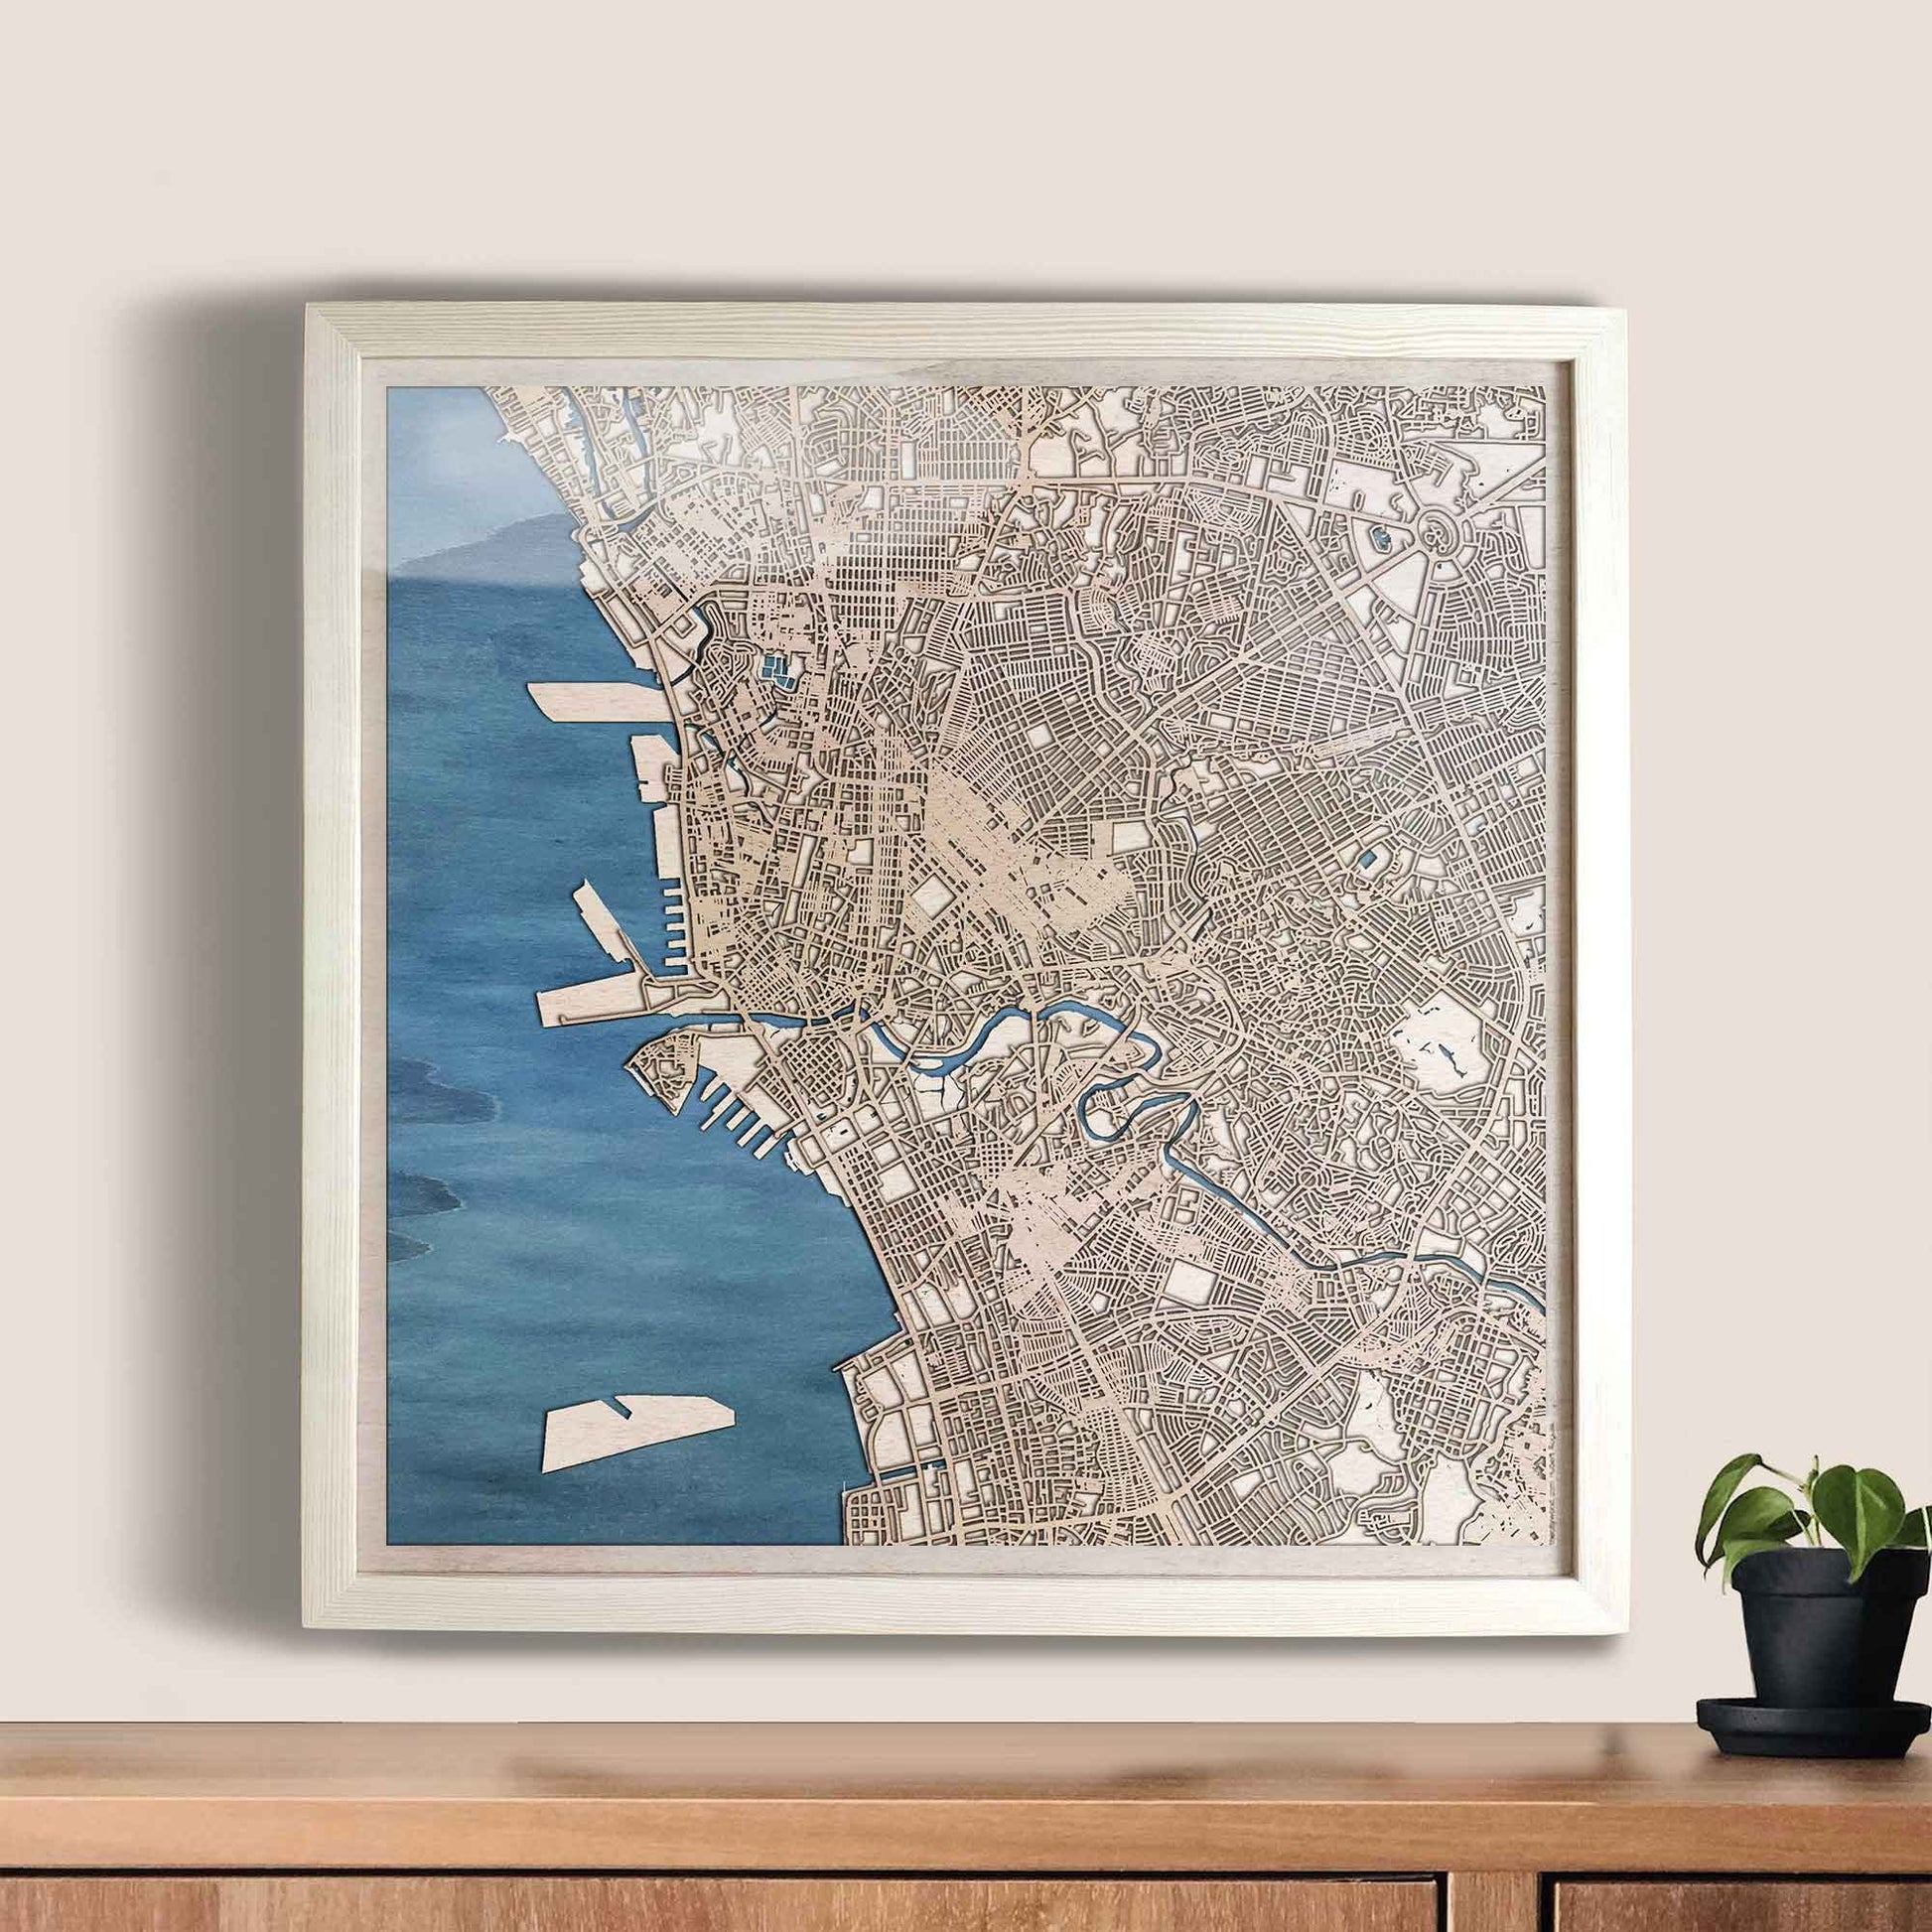 Manila Wooden Map by CityWood - Custom Wood Map Art - Unique Laser Cut Engraved - Anniversary Gift